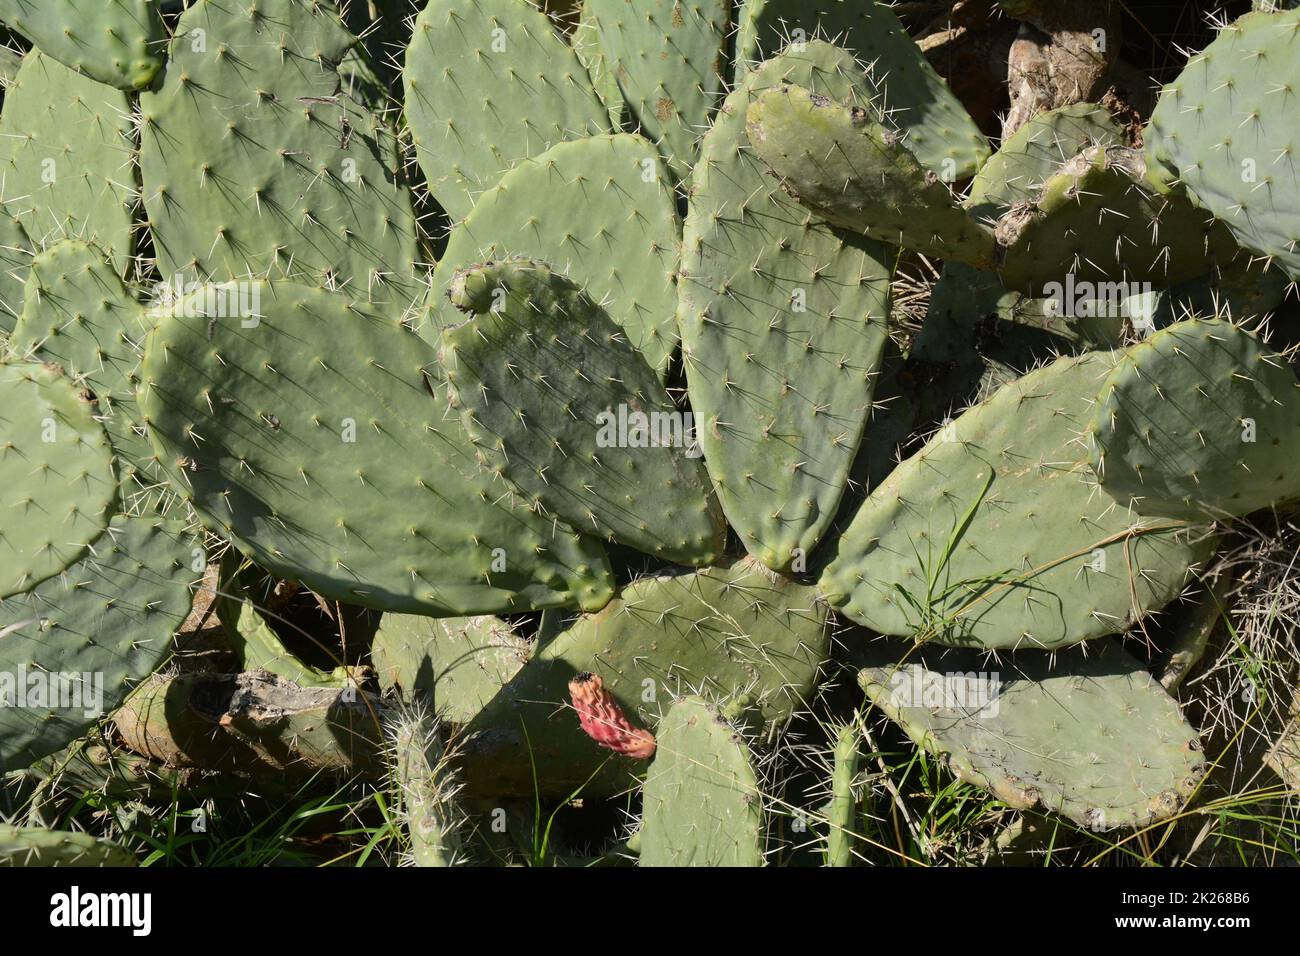 Sabra cactus plant, Israel. Opuntia cactus with large flat pads and red thorny edible fruits. Prickly pears fruit Stock Photo